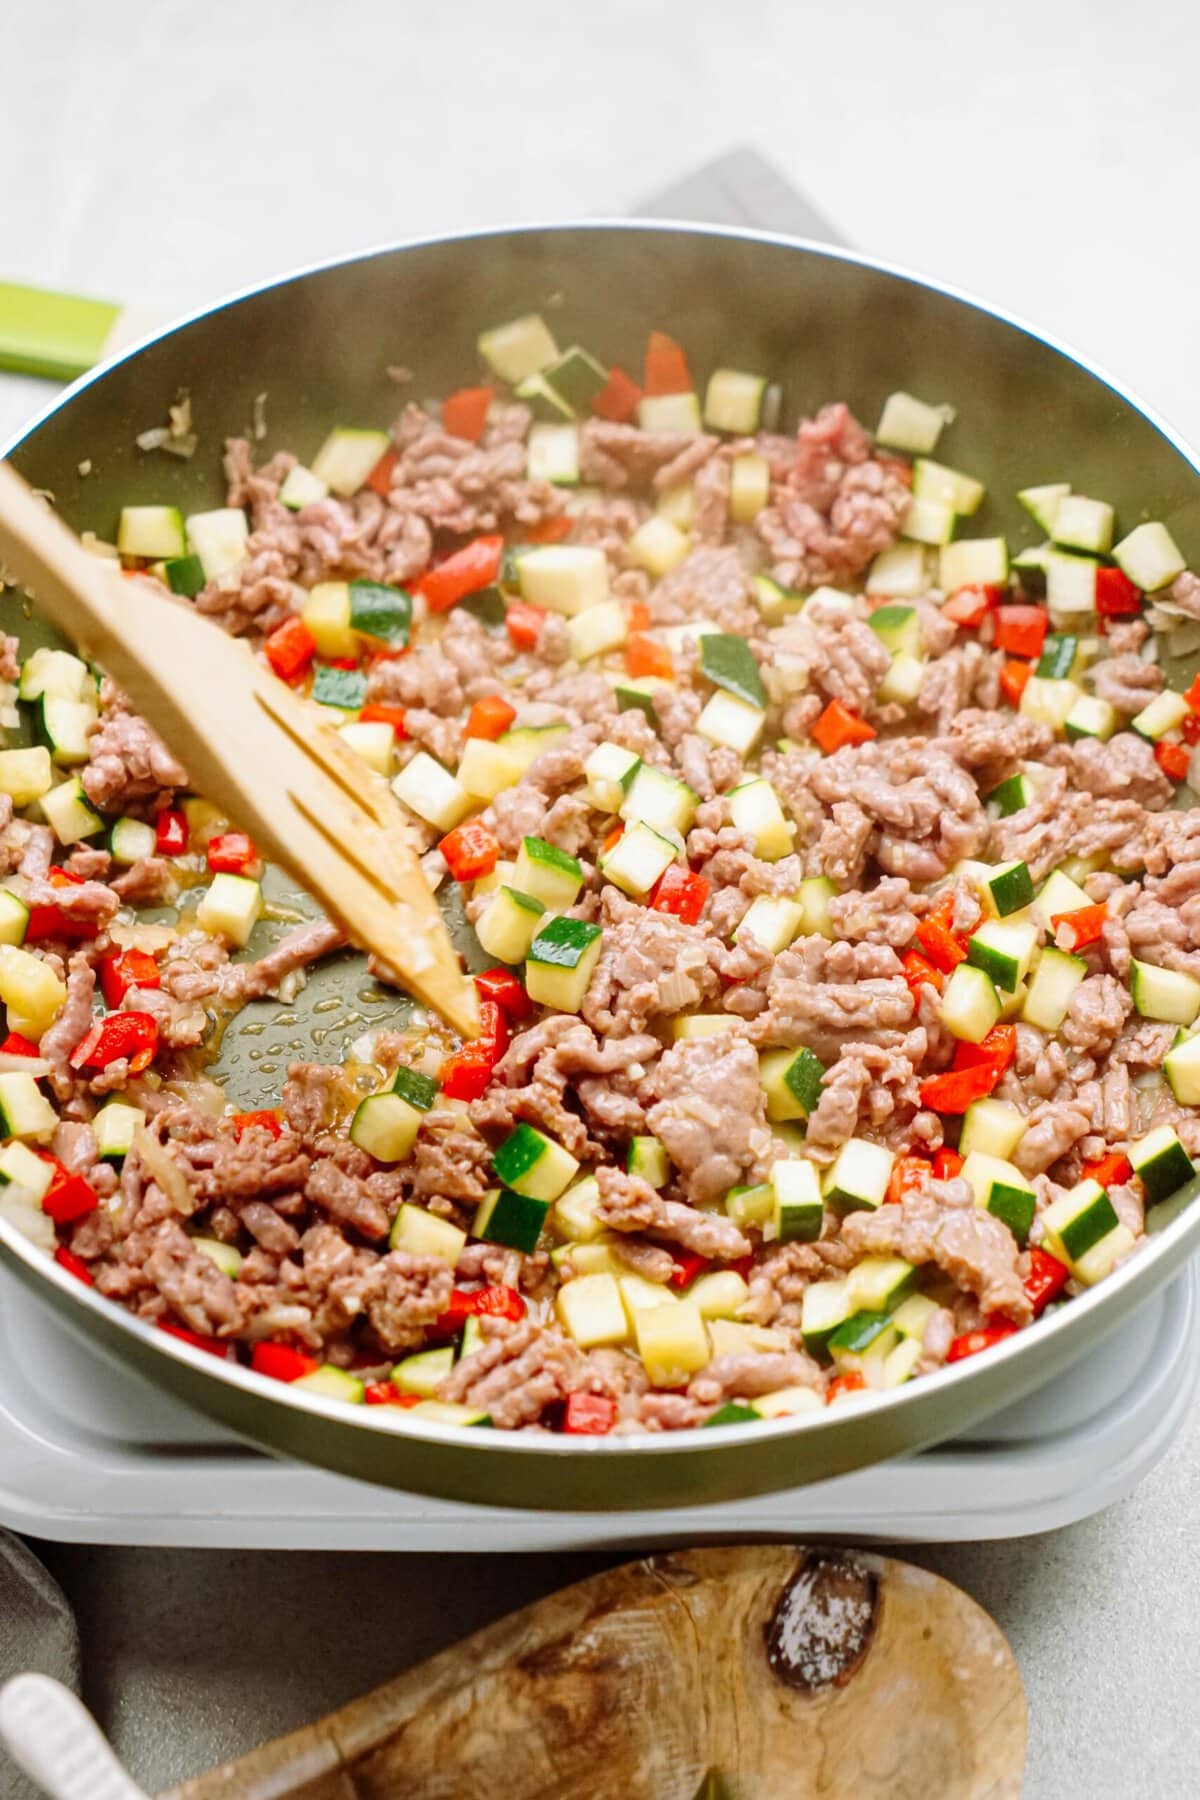 A skillet on a stovetop with minced meat, diced zucchini, red bell peppers, and onions being stirred with a wooden spatula, surrounded by cooking utensils.